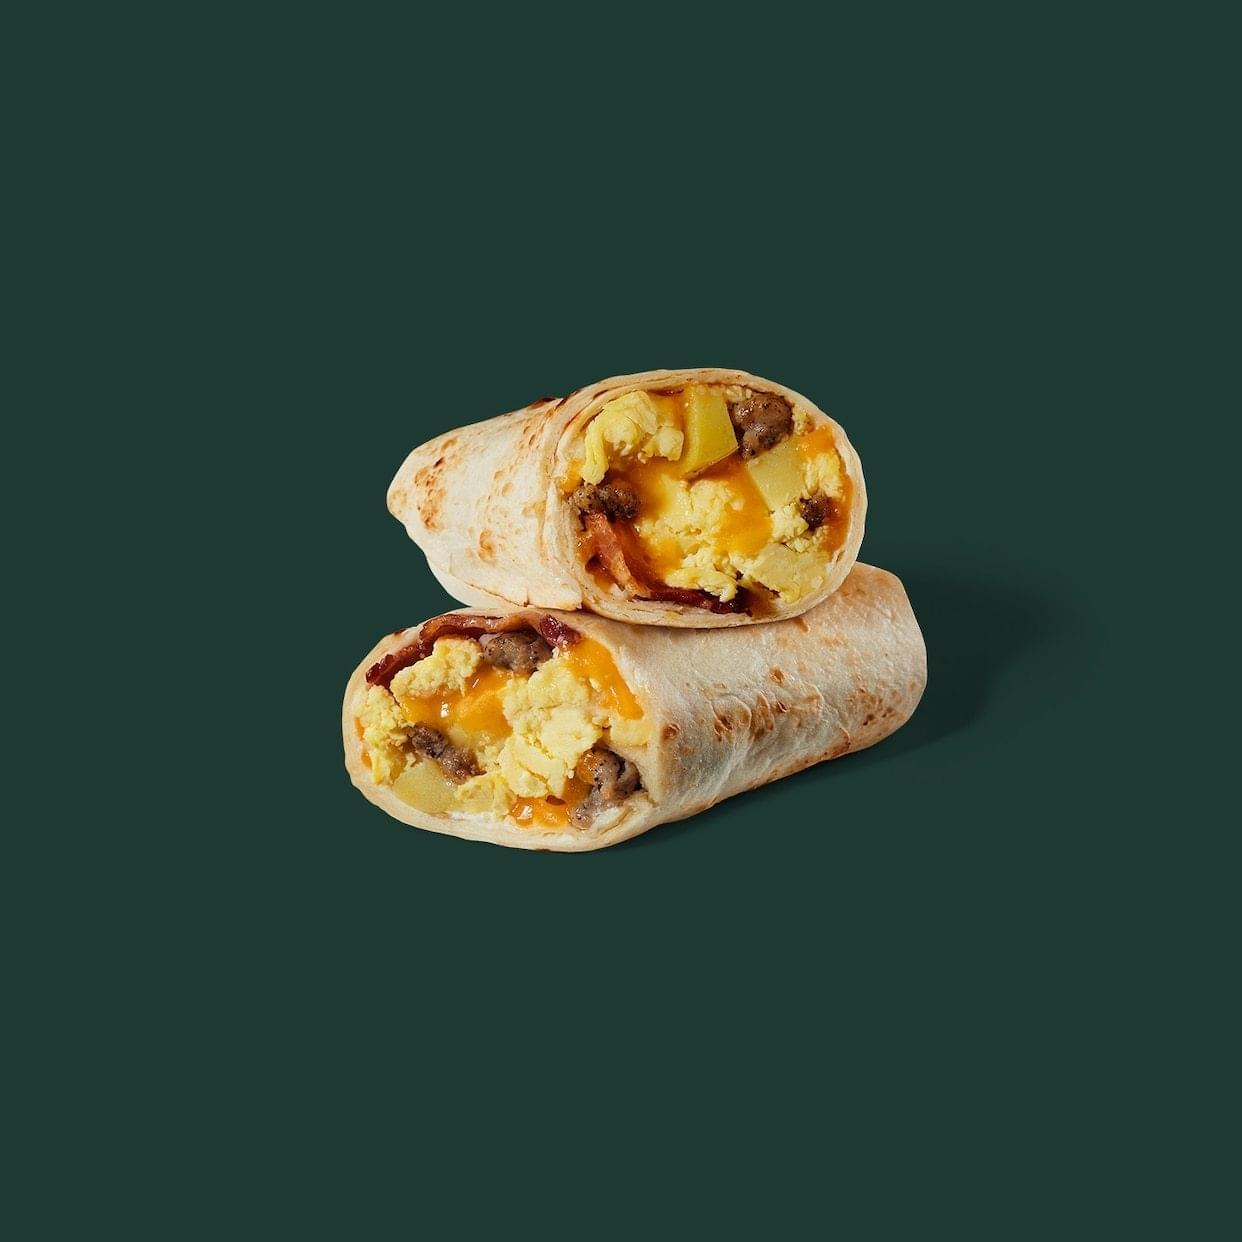 Starbucks Bacon, Sausage & Egg Wrap Nutrition Facts